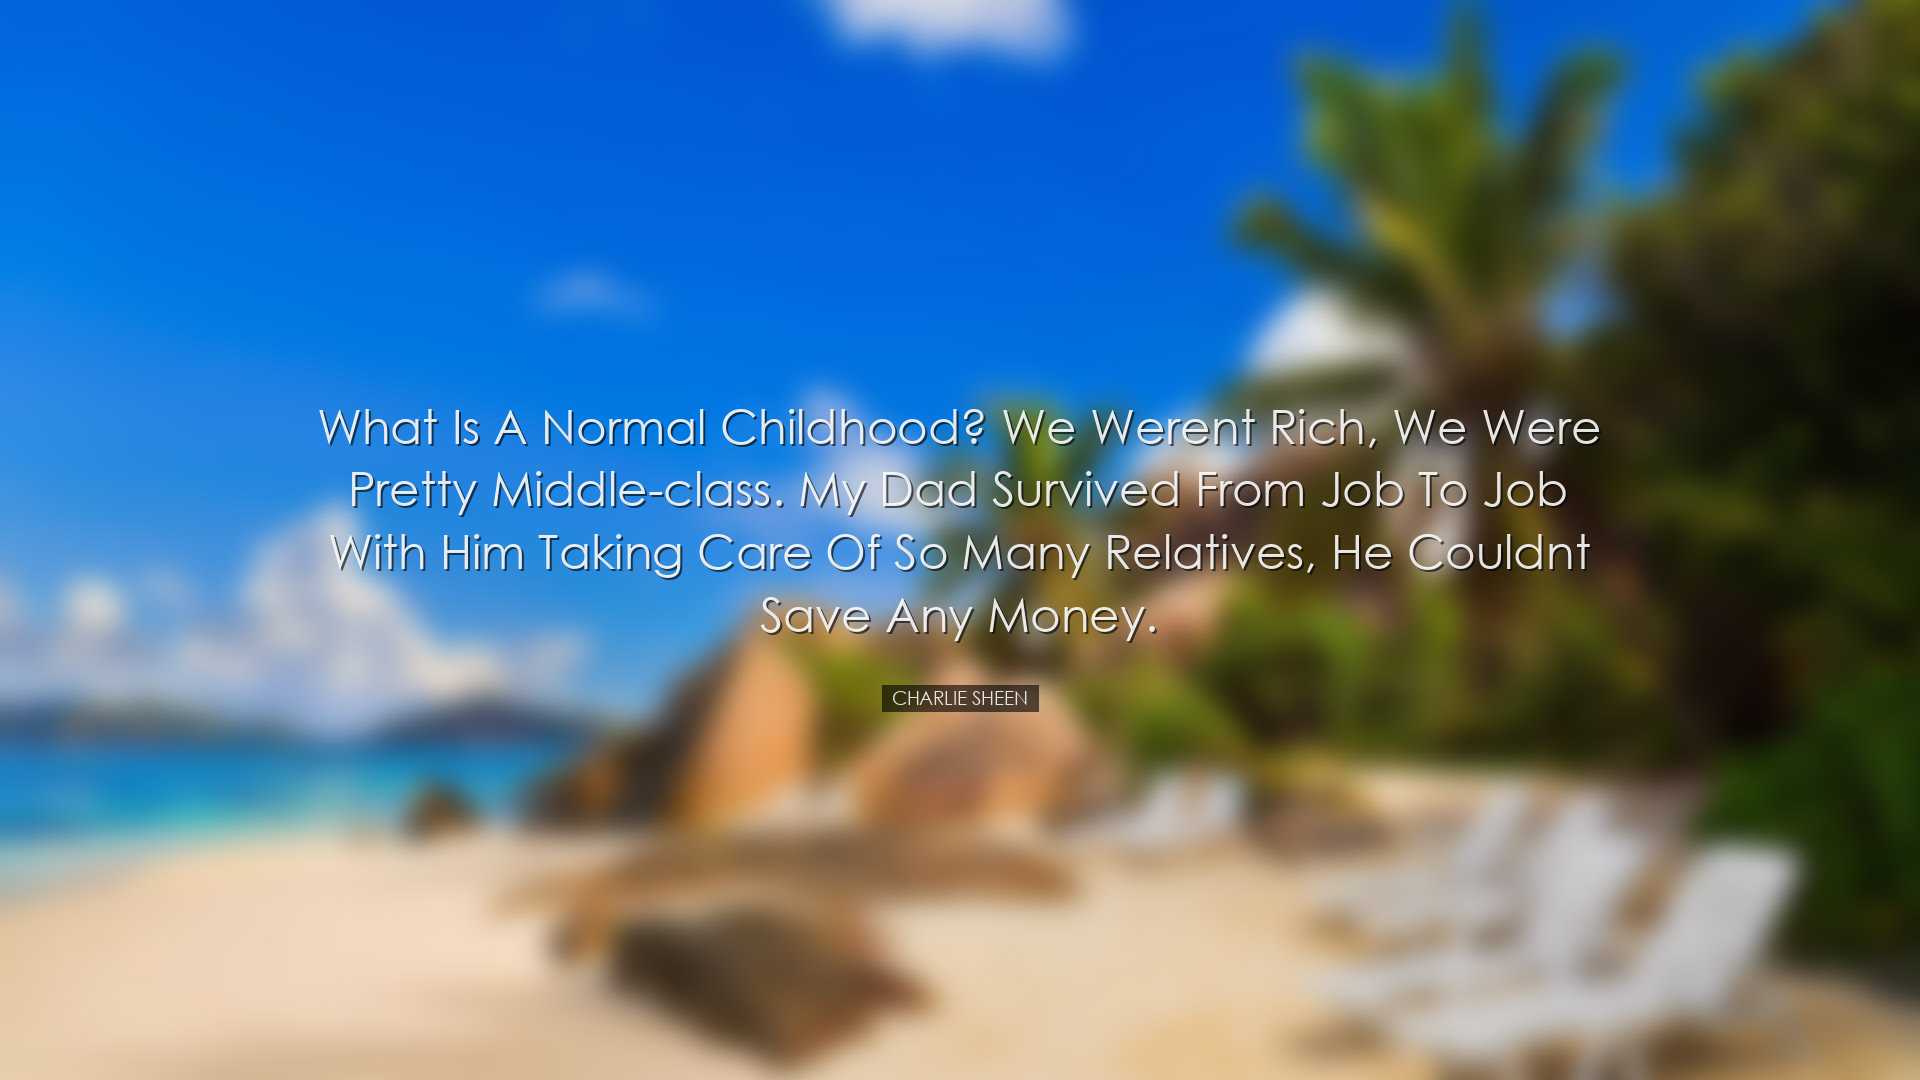 What is a normal childhood? We werent rich, we were pretty middle-